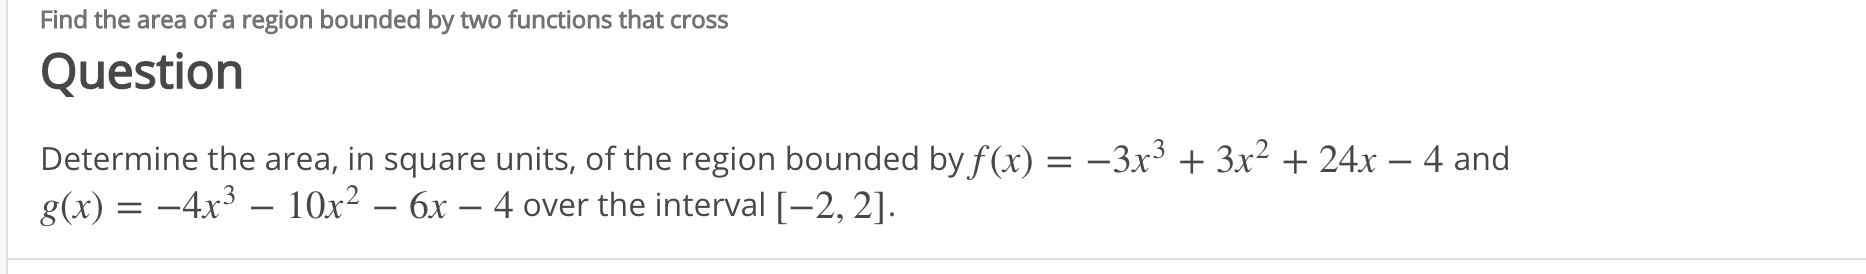 Determine the area, in square units, of the region bounded by f (x) = –3x³ + 3x² + 24x - 4 and
g(x) = -4x³ – 10x² – 6x – 4 over the interval [-2, 2].
|
